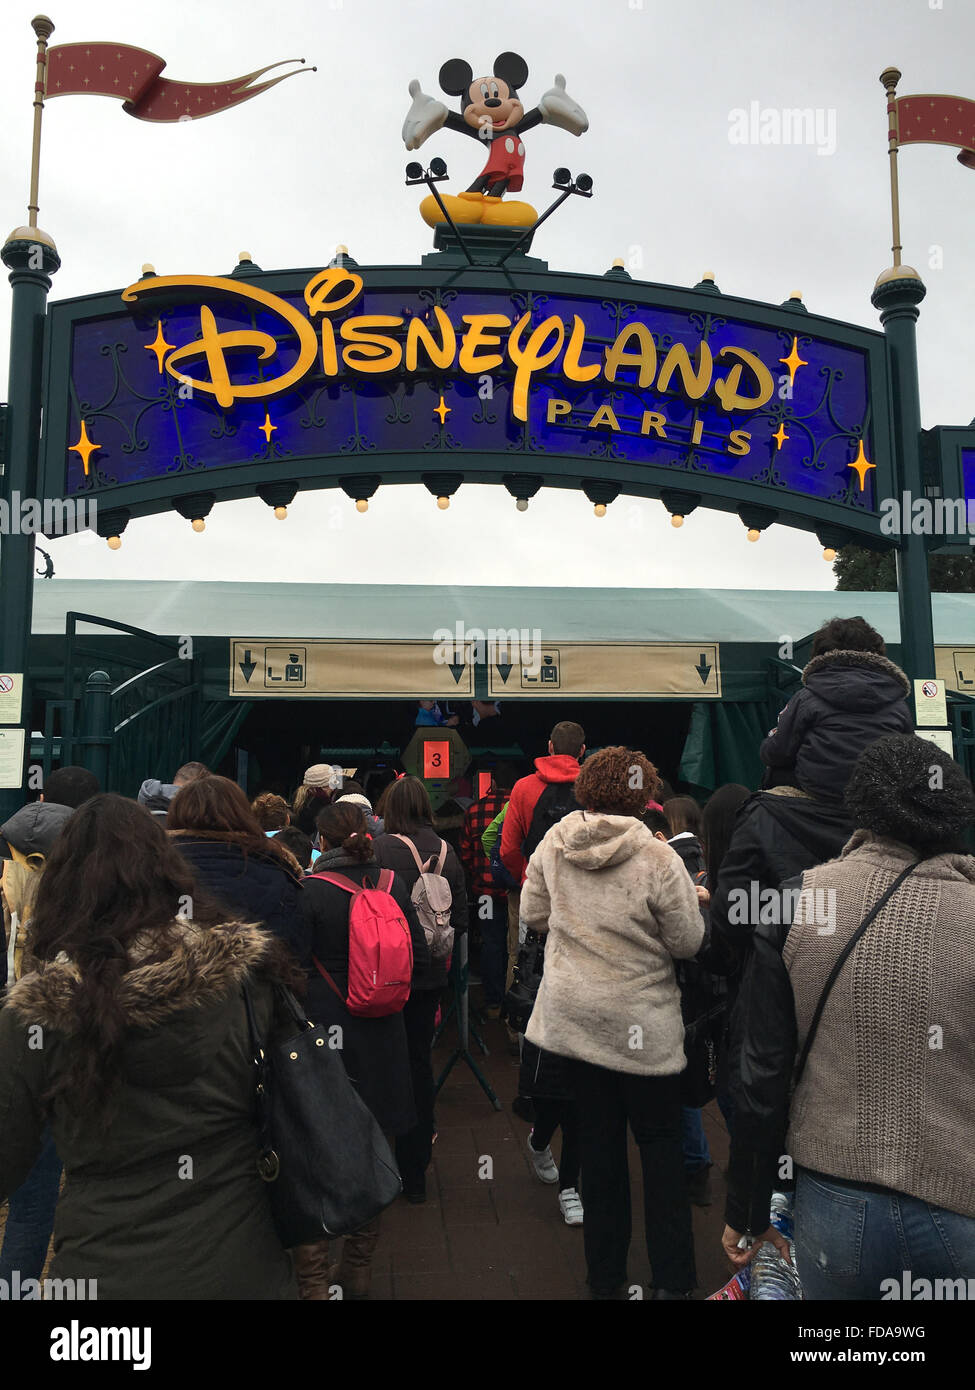 Visitors to Disneyland Paris queue to have their bags scanned at the entrance. Picture: Scott Bairstow/Alamy Stock Photo